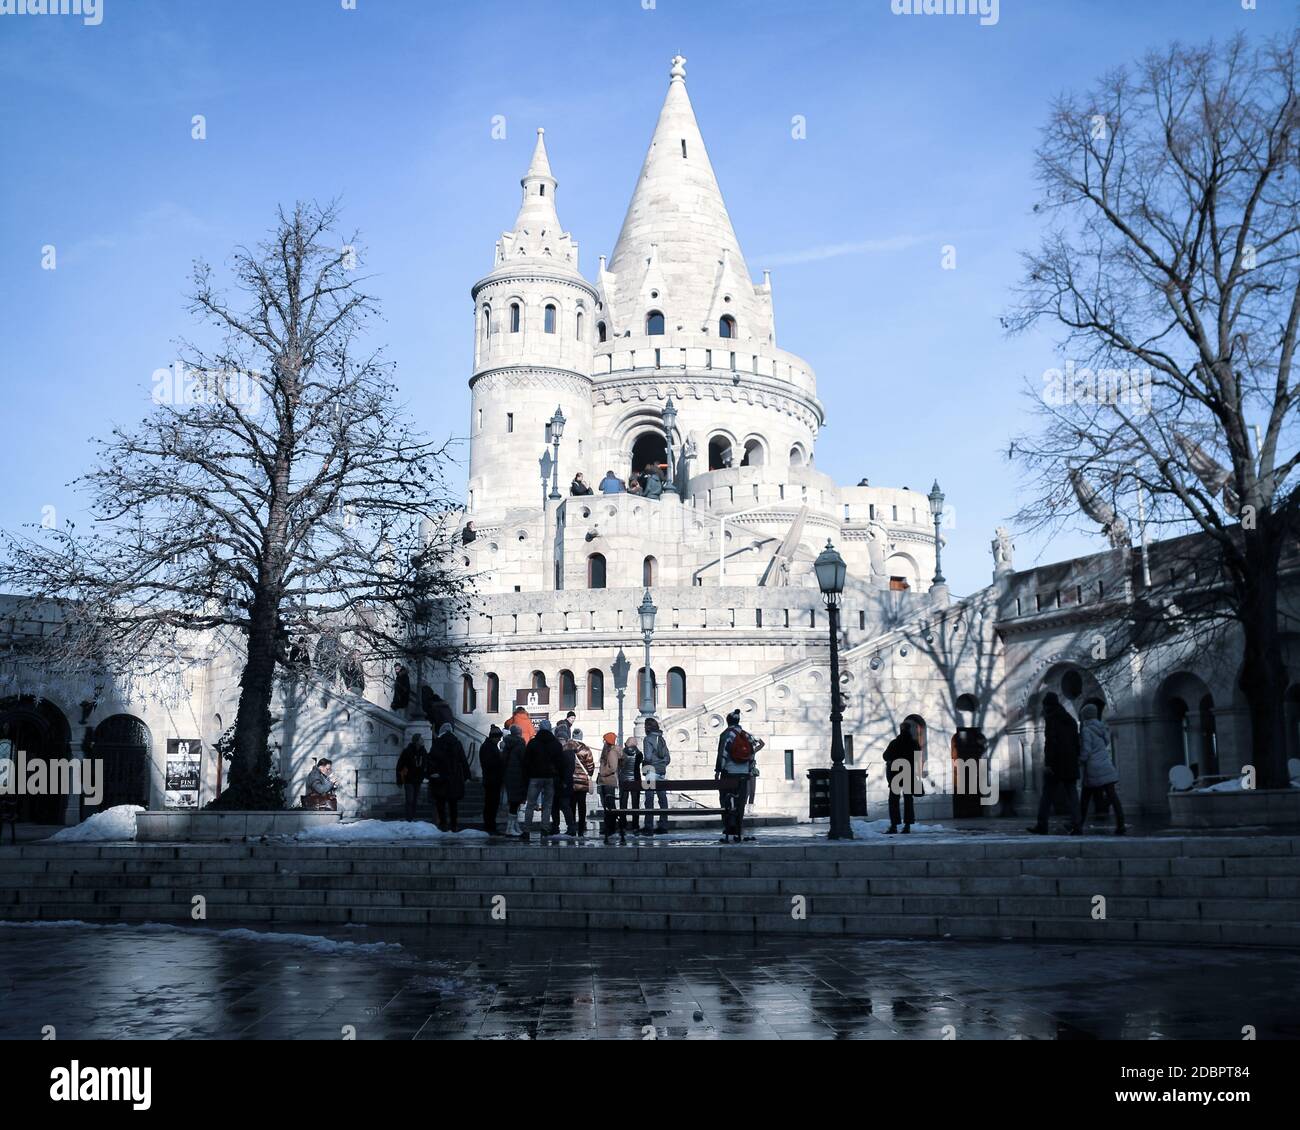 Tourism at Fisherman's Bastion (hungarian: Halászbástya) on a snowy winter day in Budapest, capital of Hungary. Stock Photo